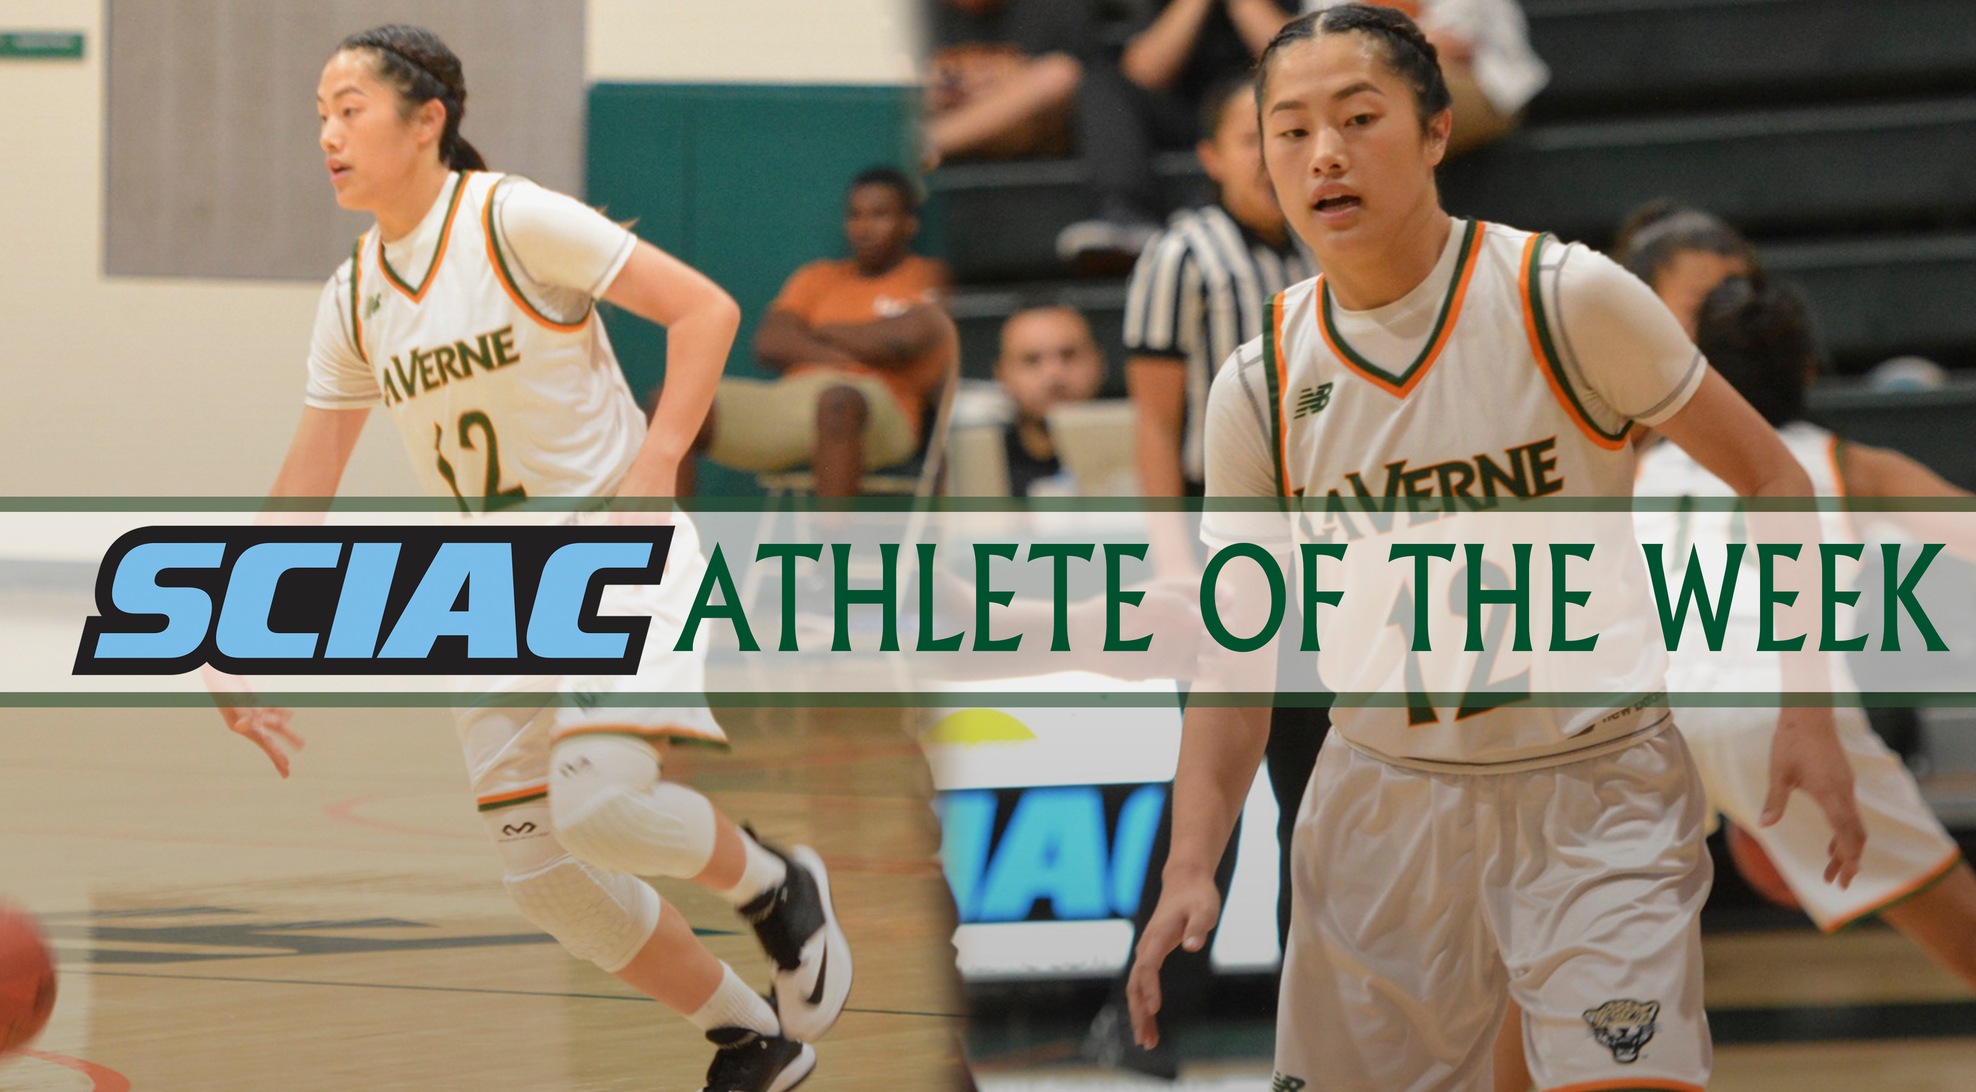 Xiong Earns SCIAC Athlete of the Week Honors